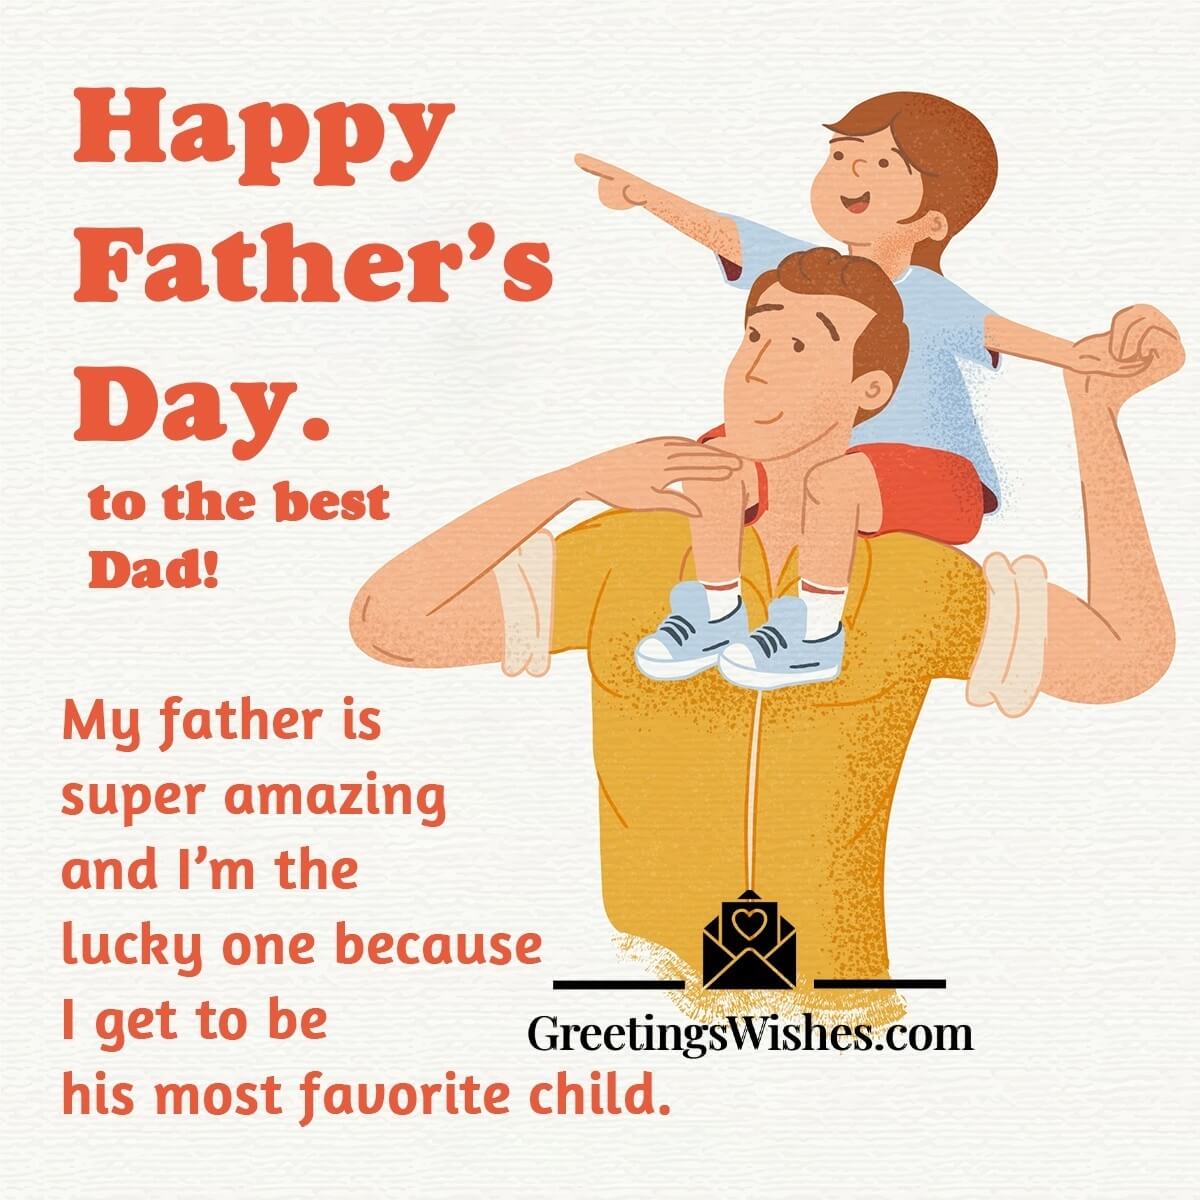 Happy Father’s Day Wishes To Best Dad